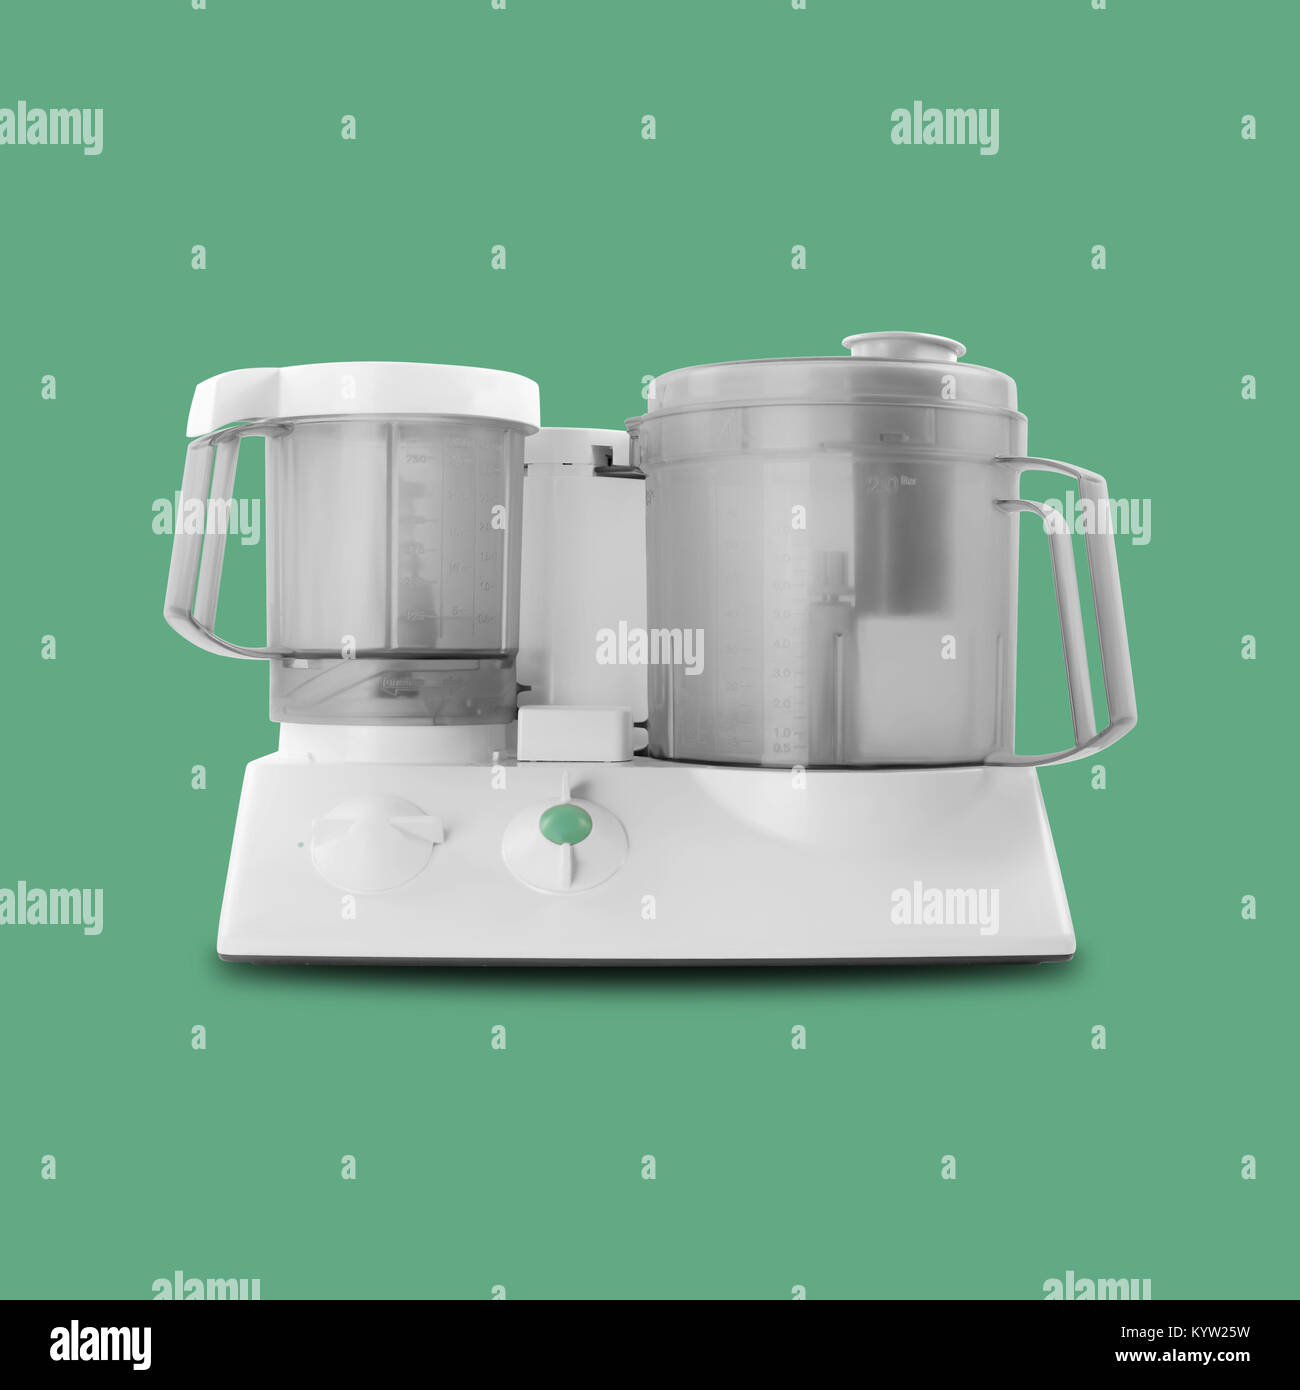 https://c8.alamy.com/comp/KYW25W/home-appliance-food-processor-on-a-green-background-it-is-isolated-KYW25W.jpg